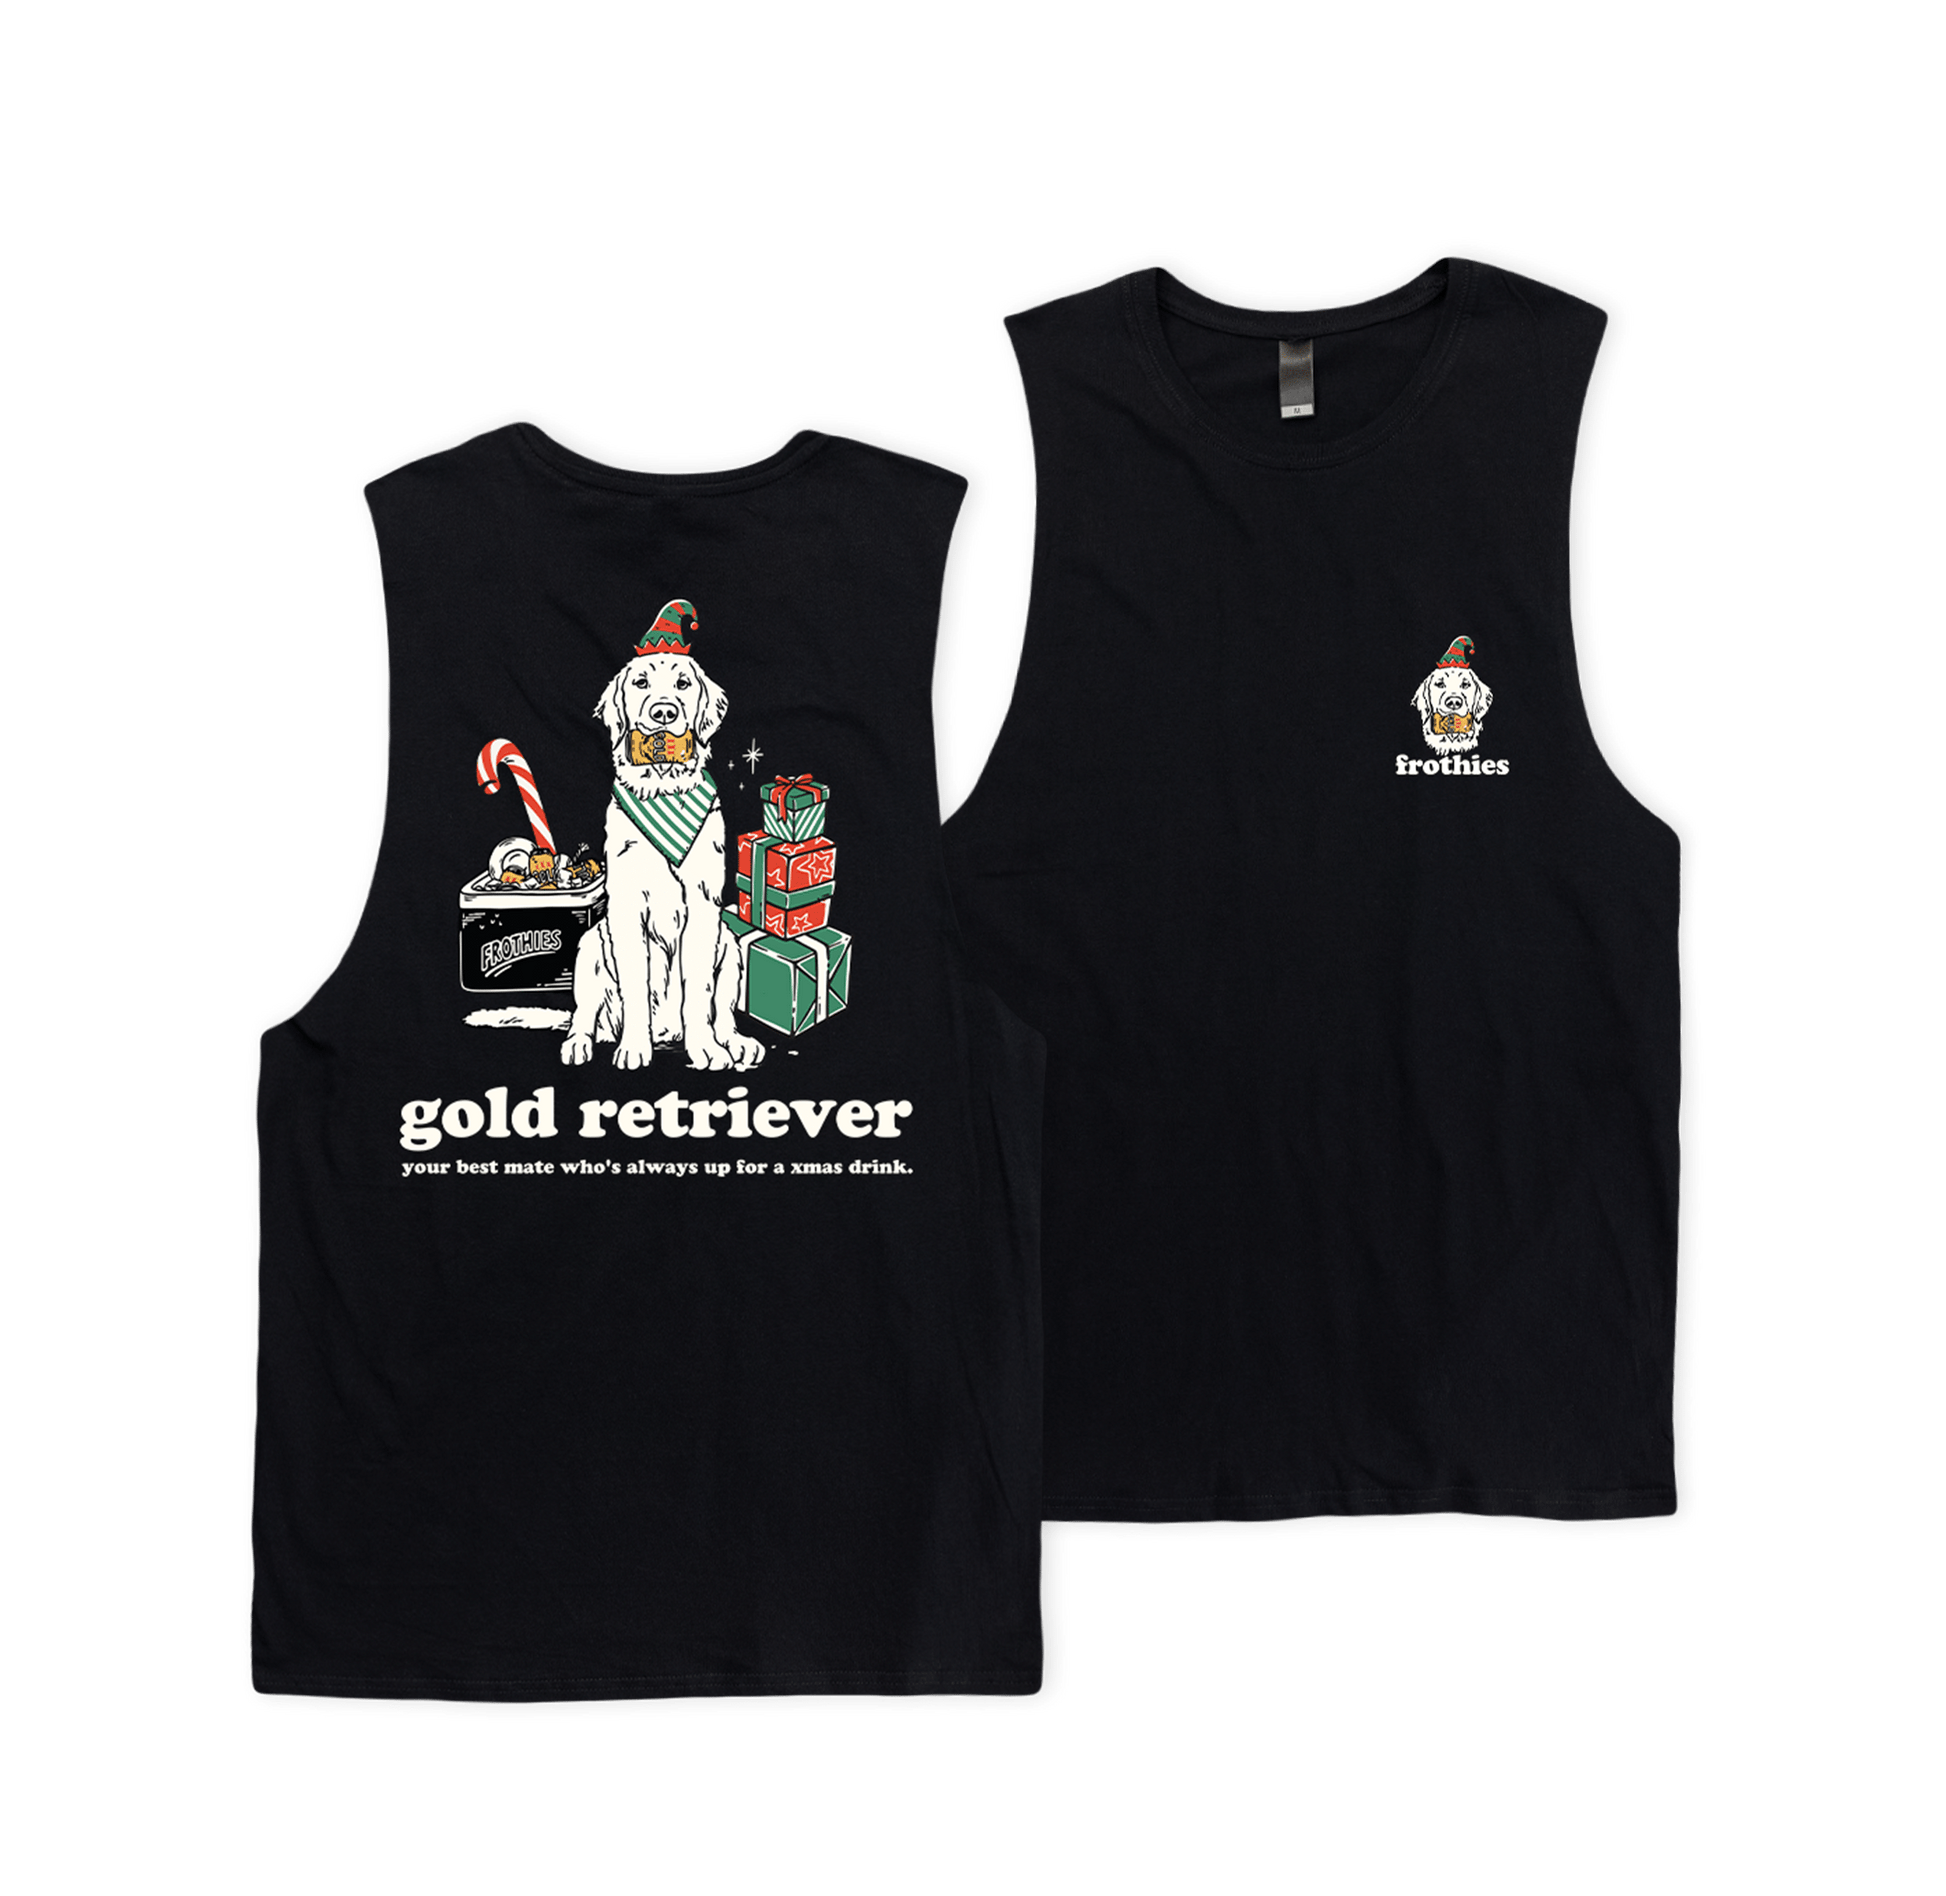 Xmas Gold Retriever Muscle Tee Muscle Tanks Frothies